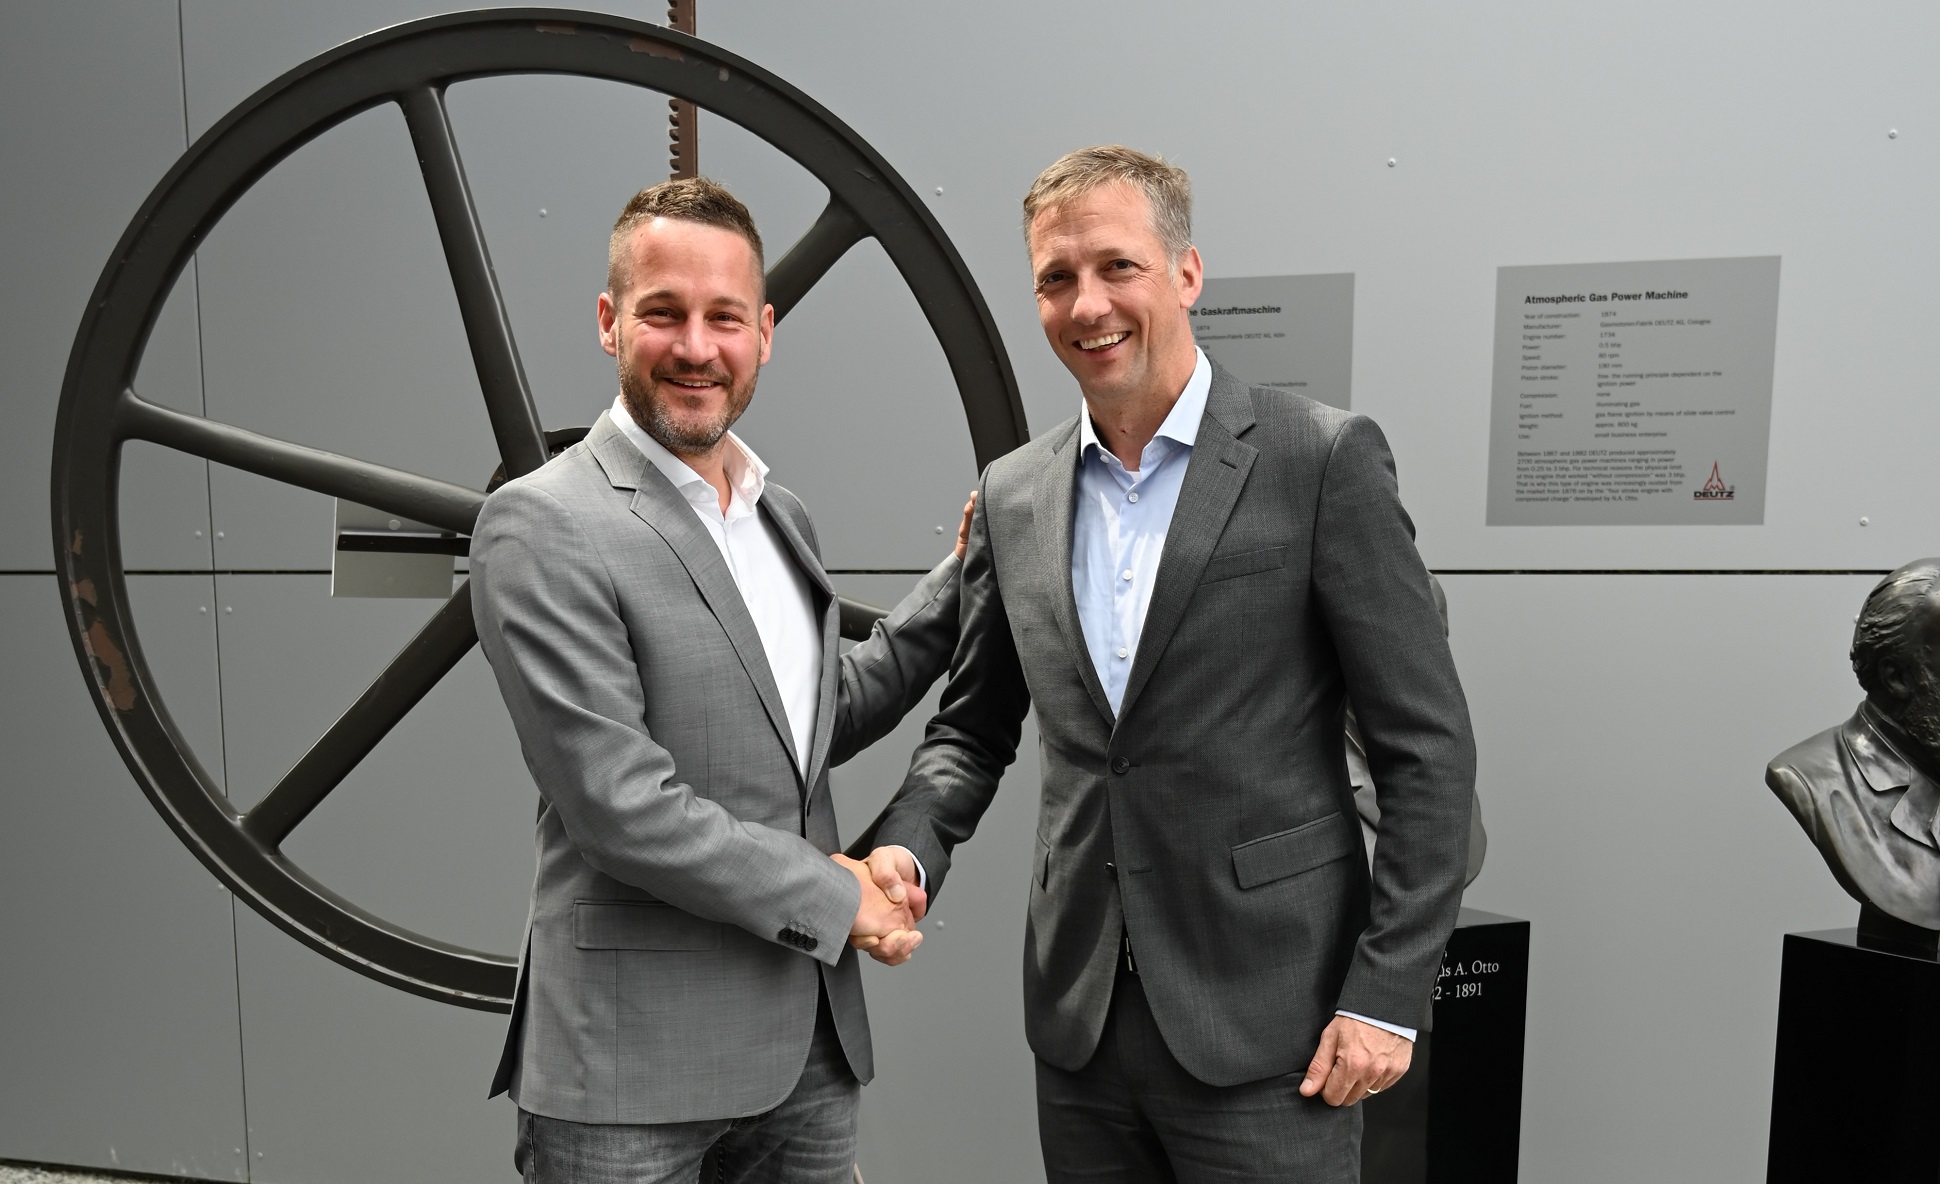 DEUTZ enters into cooperation with Daimler Truck to develop and market medium- and heavy-duty engines. (left: Dr. Andreas Gorbach, member of the Board of Management of Daimler Truck AG; right: Dr. Sebastian C. Schulte, CEO of DEUTZ AG)